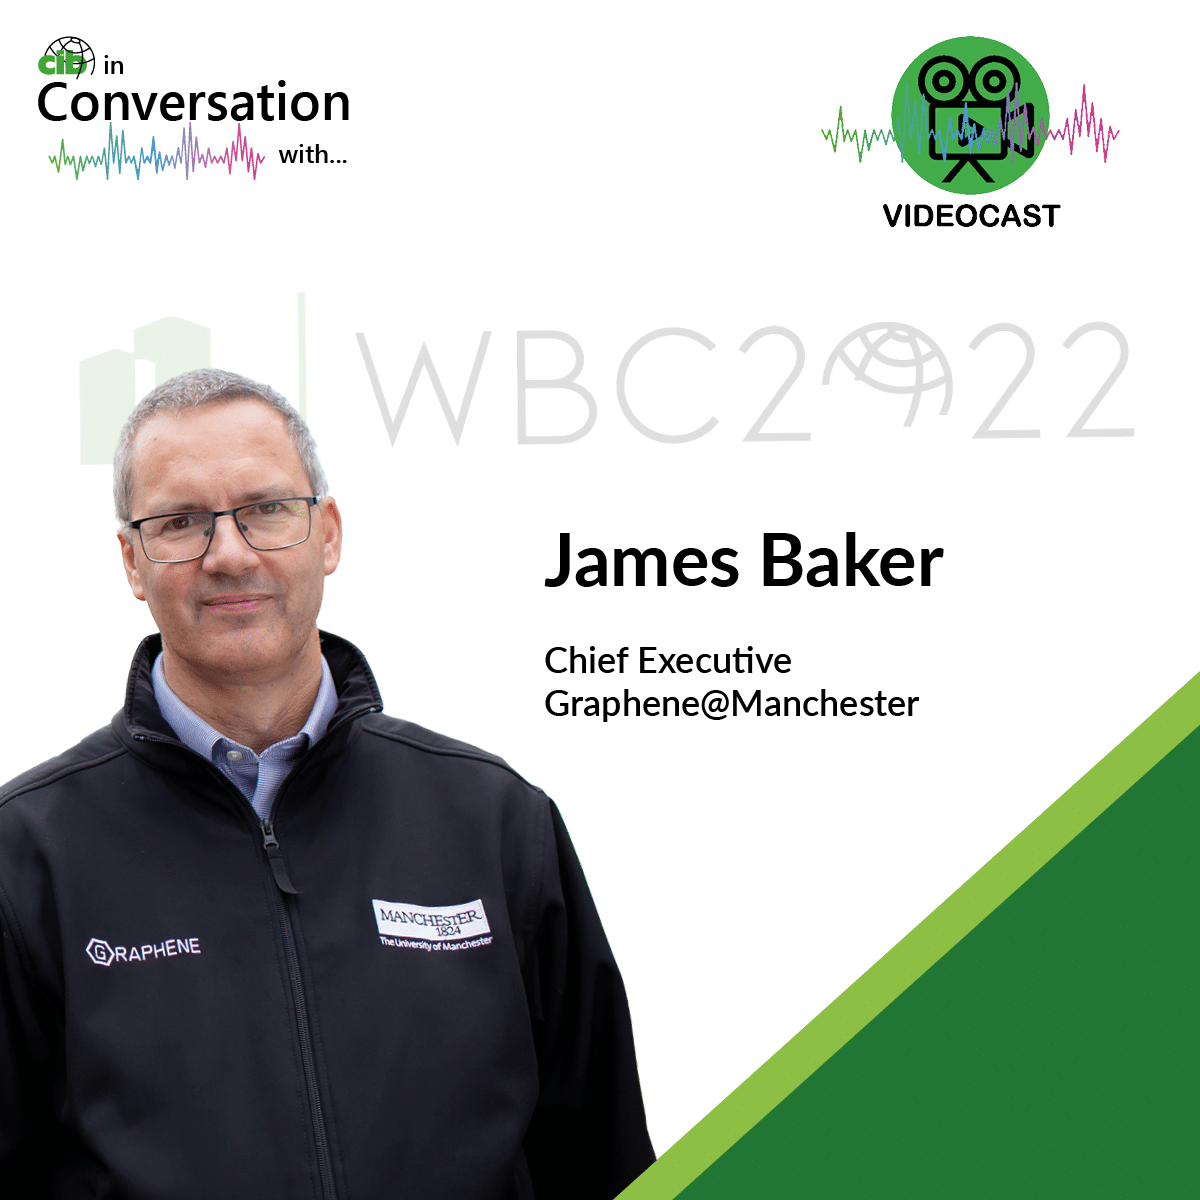 CIB in Conversation with James Baker